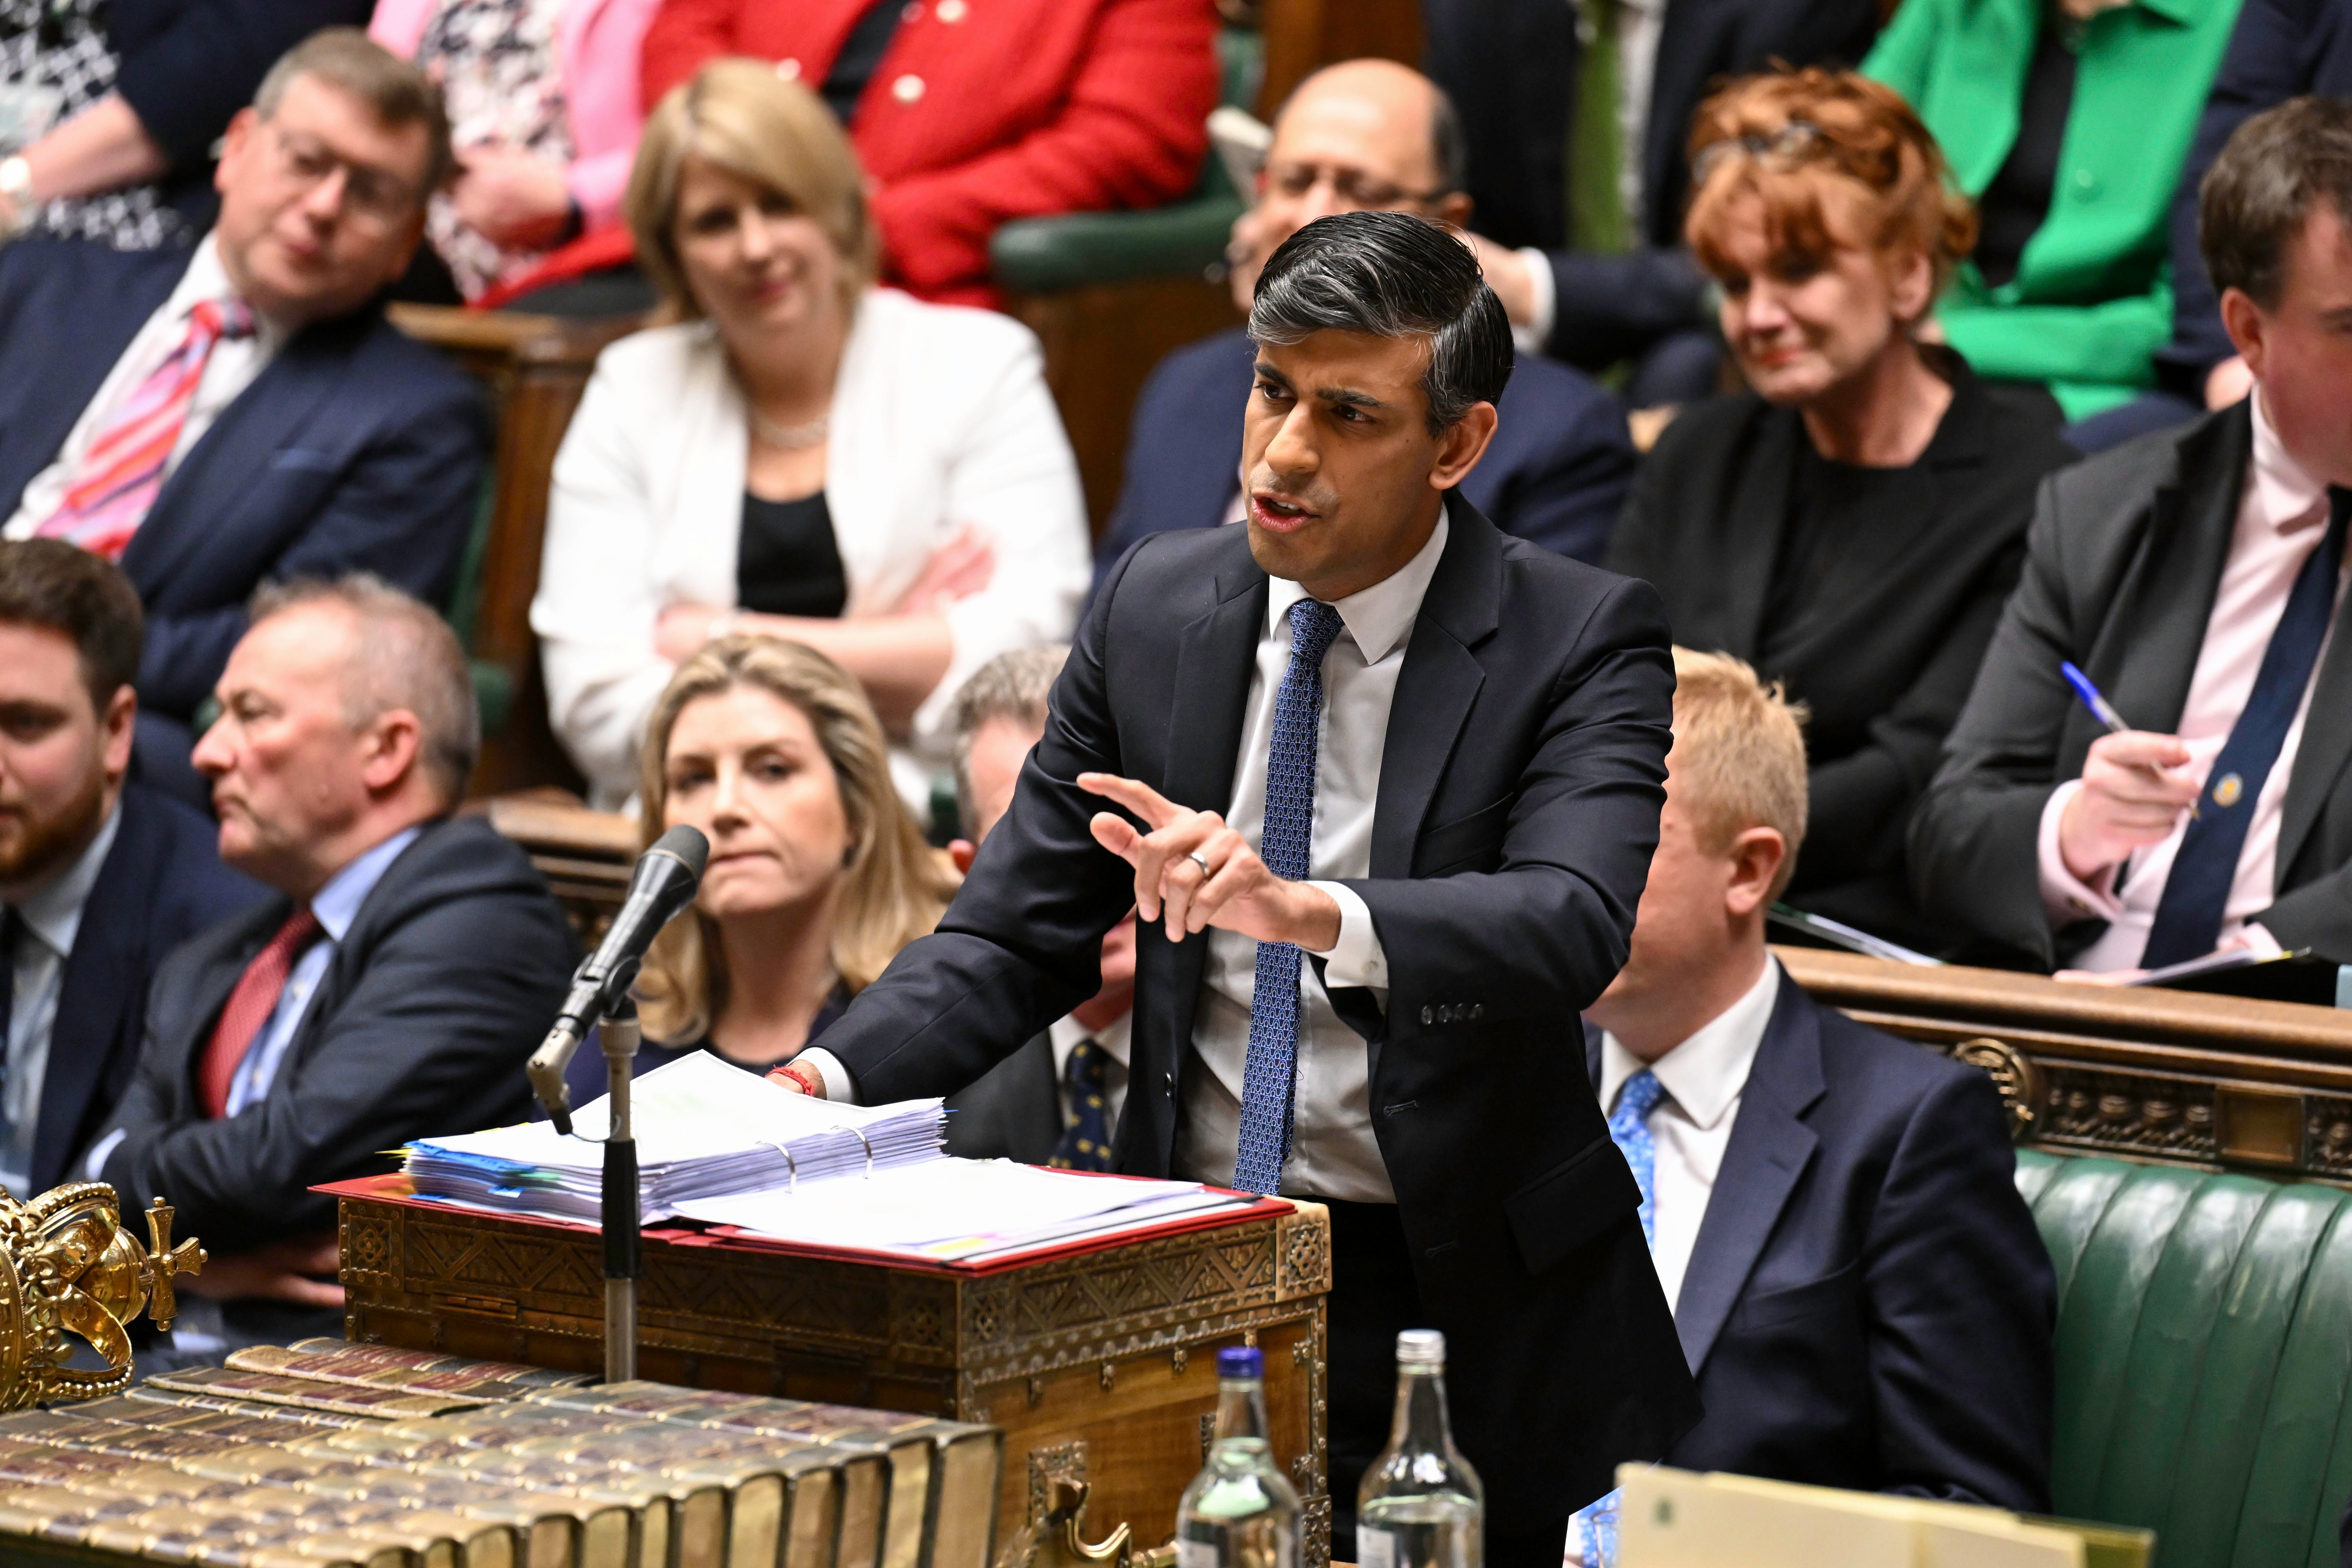 Rishi Sunak defends keeping the £10m donation at PMQs on Wednesday